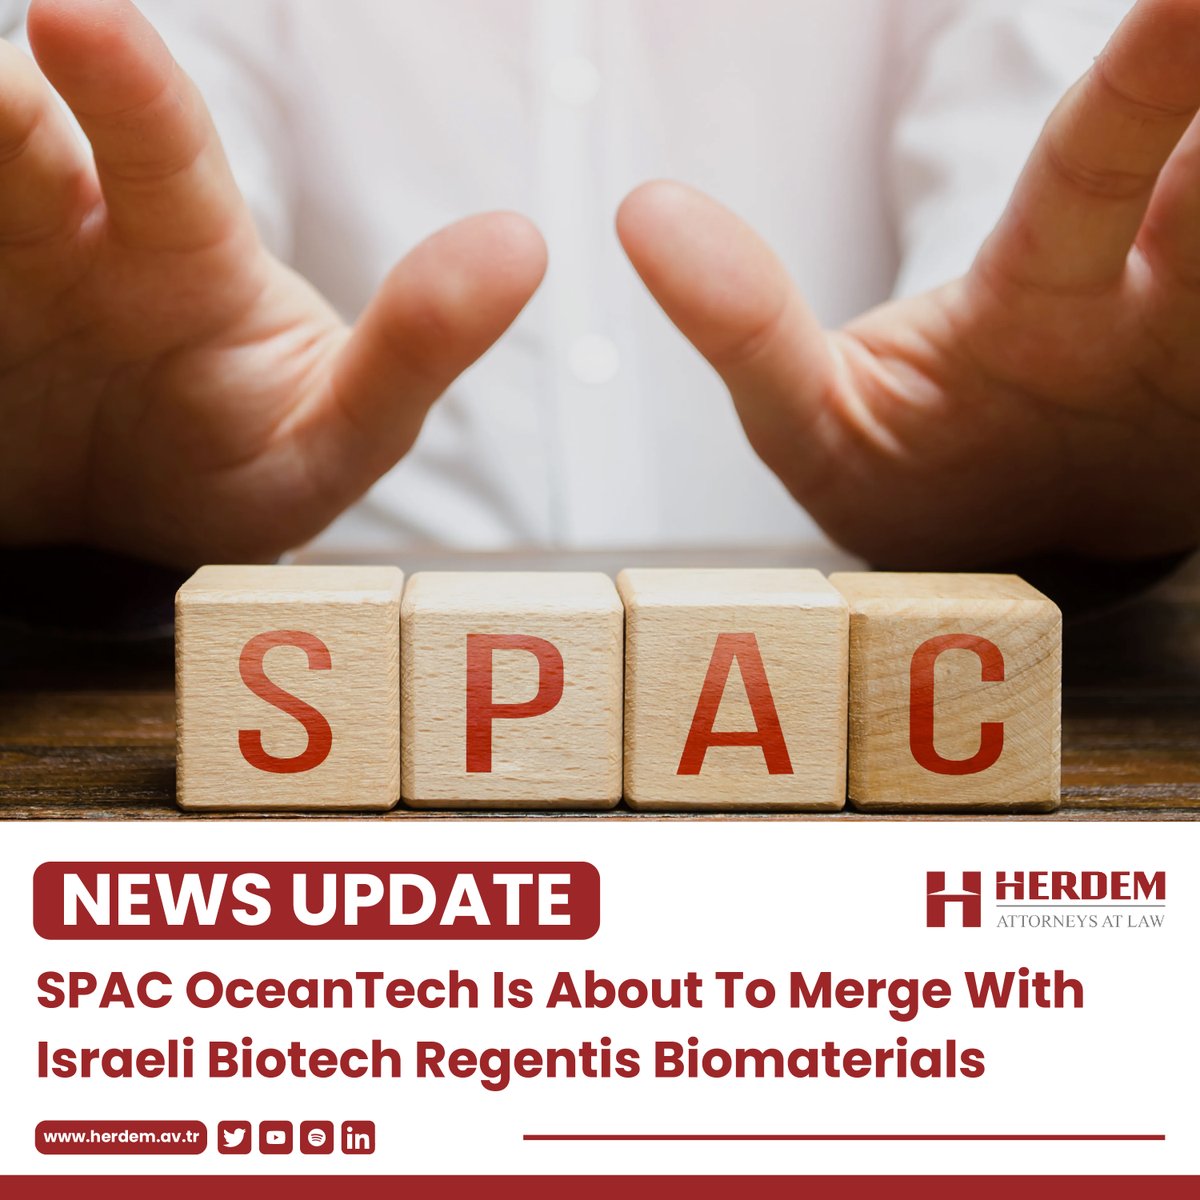 OceanTech I (NASDAQA:OTEC) has entered into a definitive agreement to combine with regenerative medicine company Regentis at a $95 million valuation.

#SPAC #mergersandacquisitions #herdem #attorneysatlaw